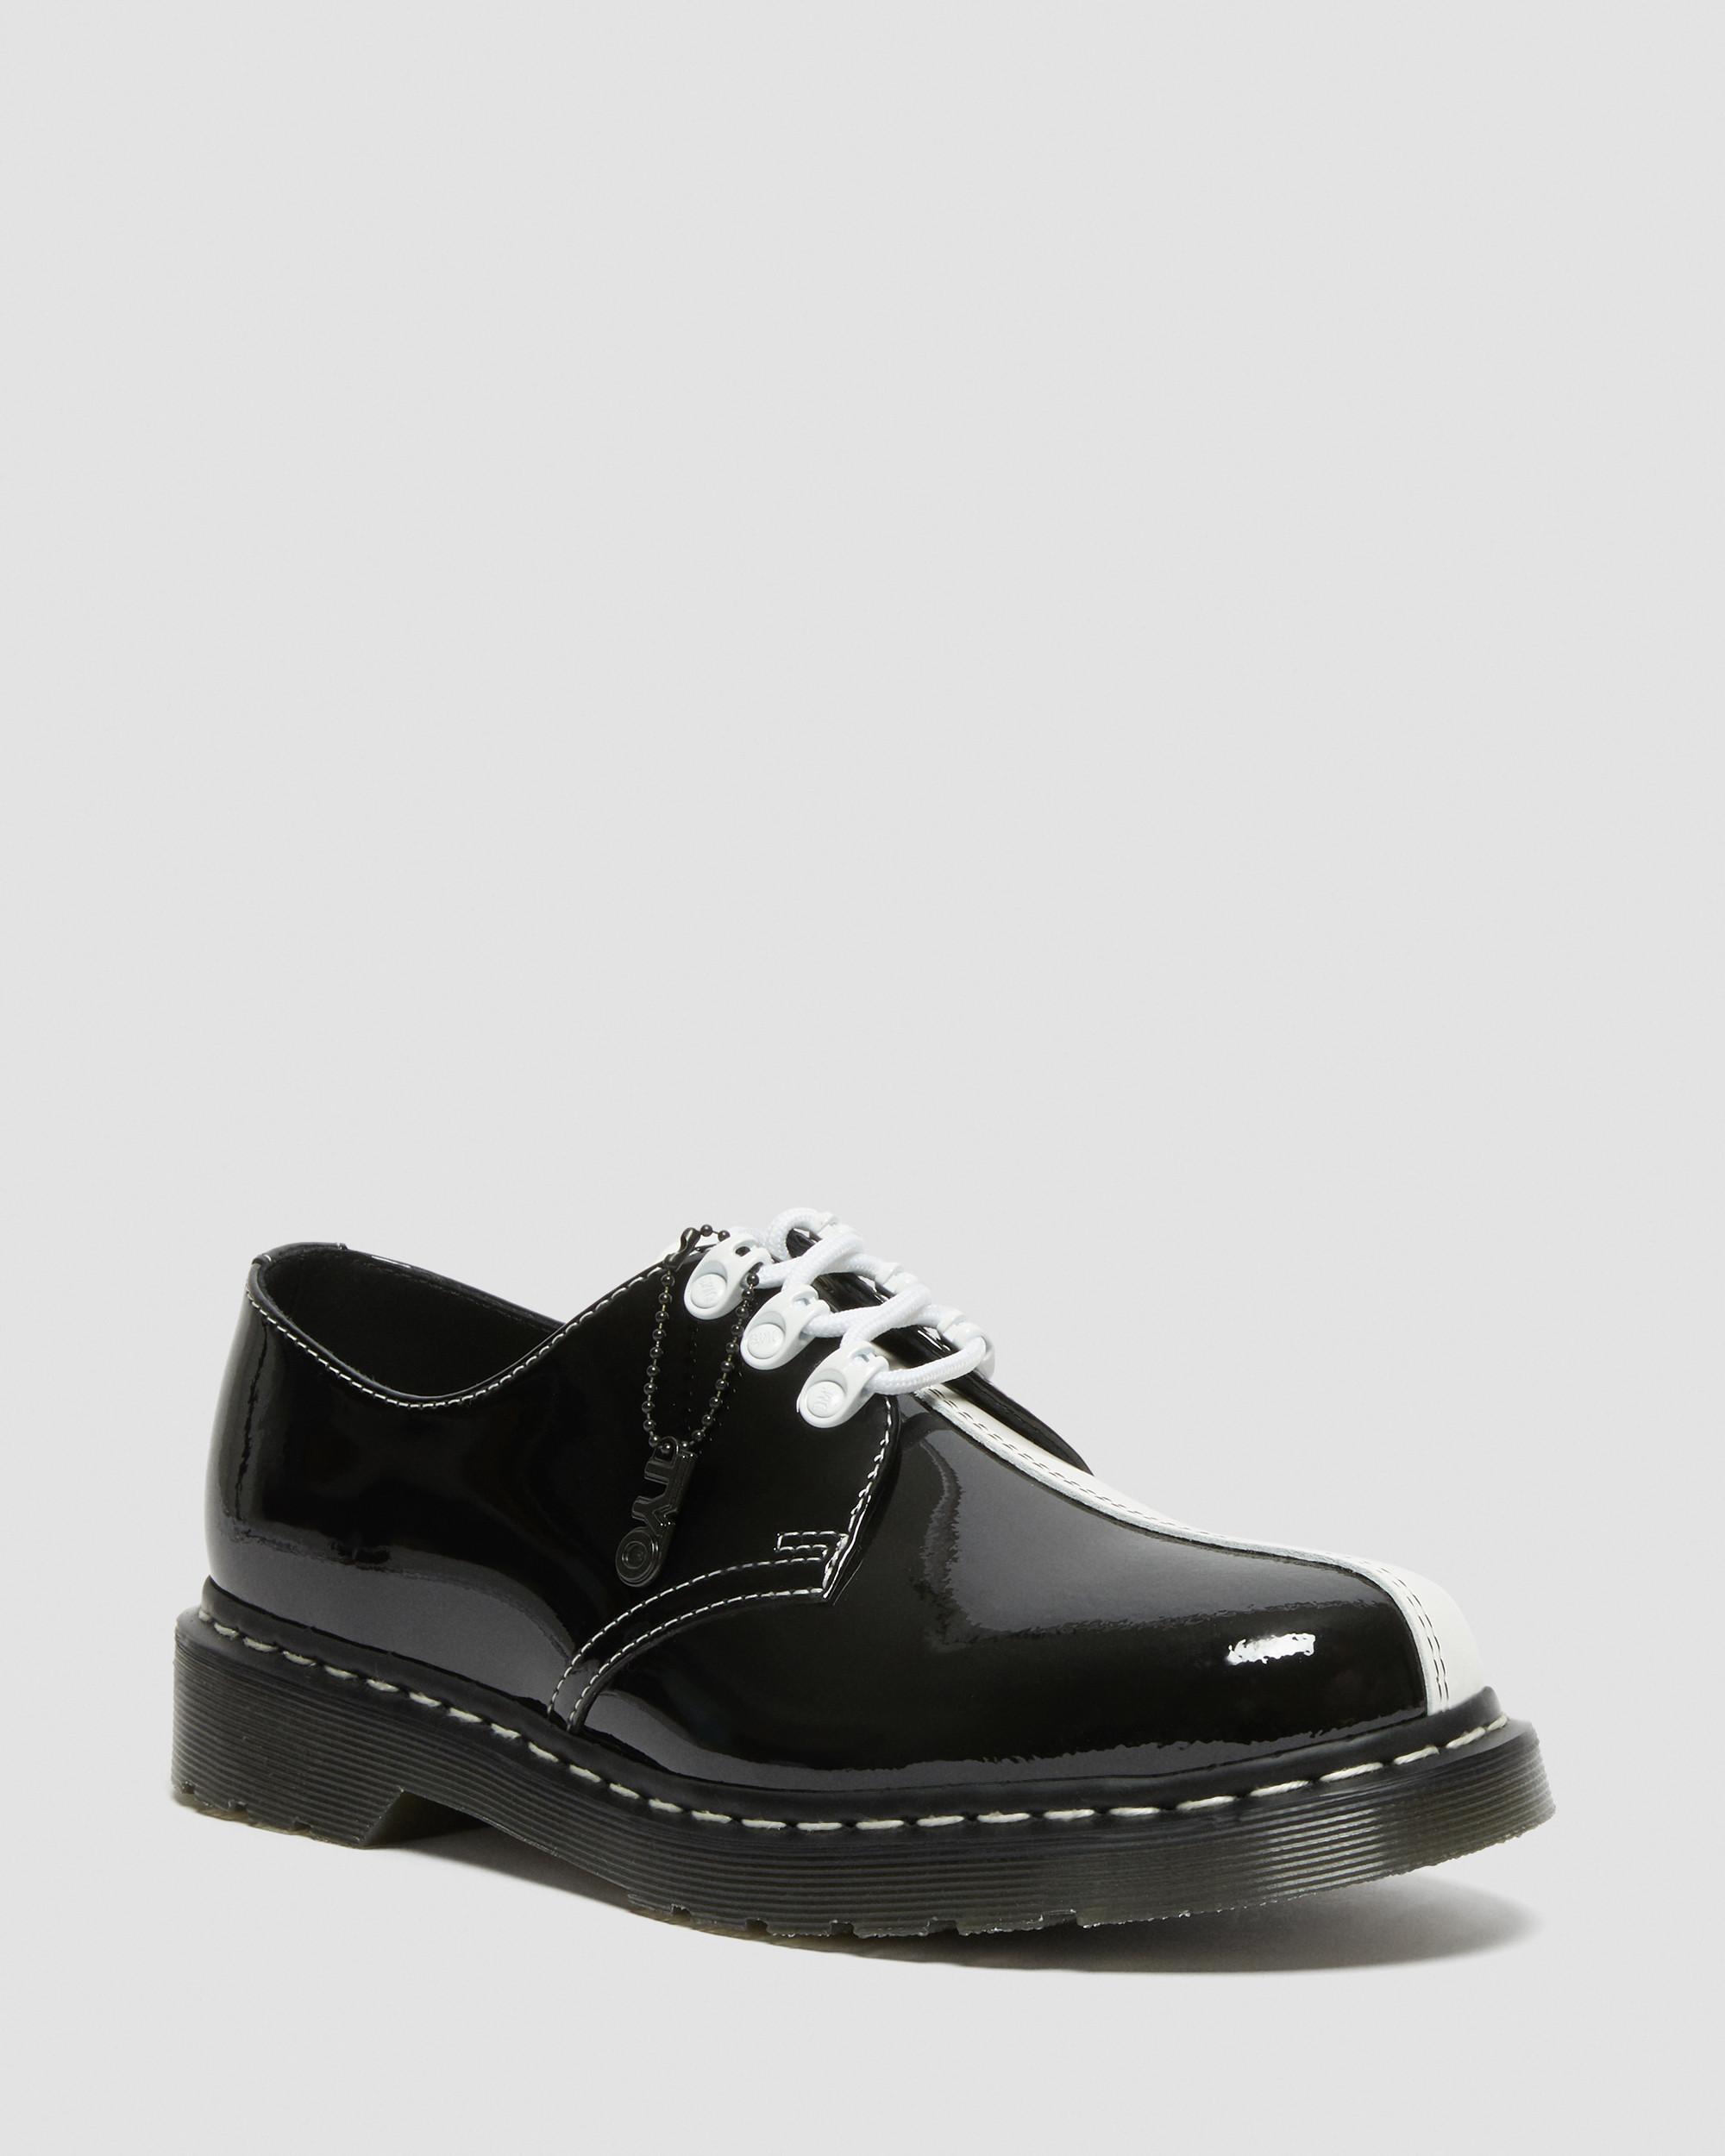 1461 Tokyo Patent Leather Oxford Shoes in Black | Dr. Martens